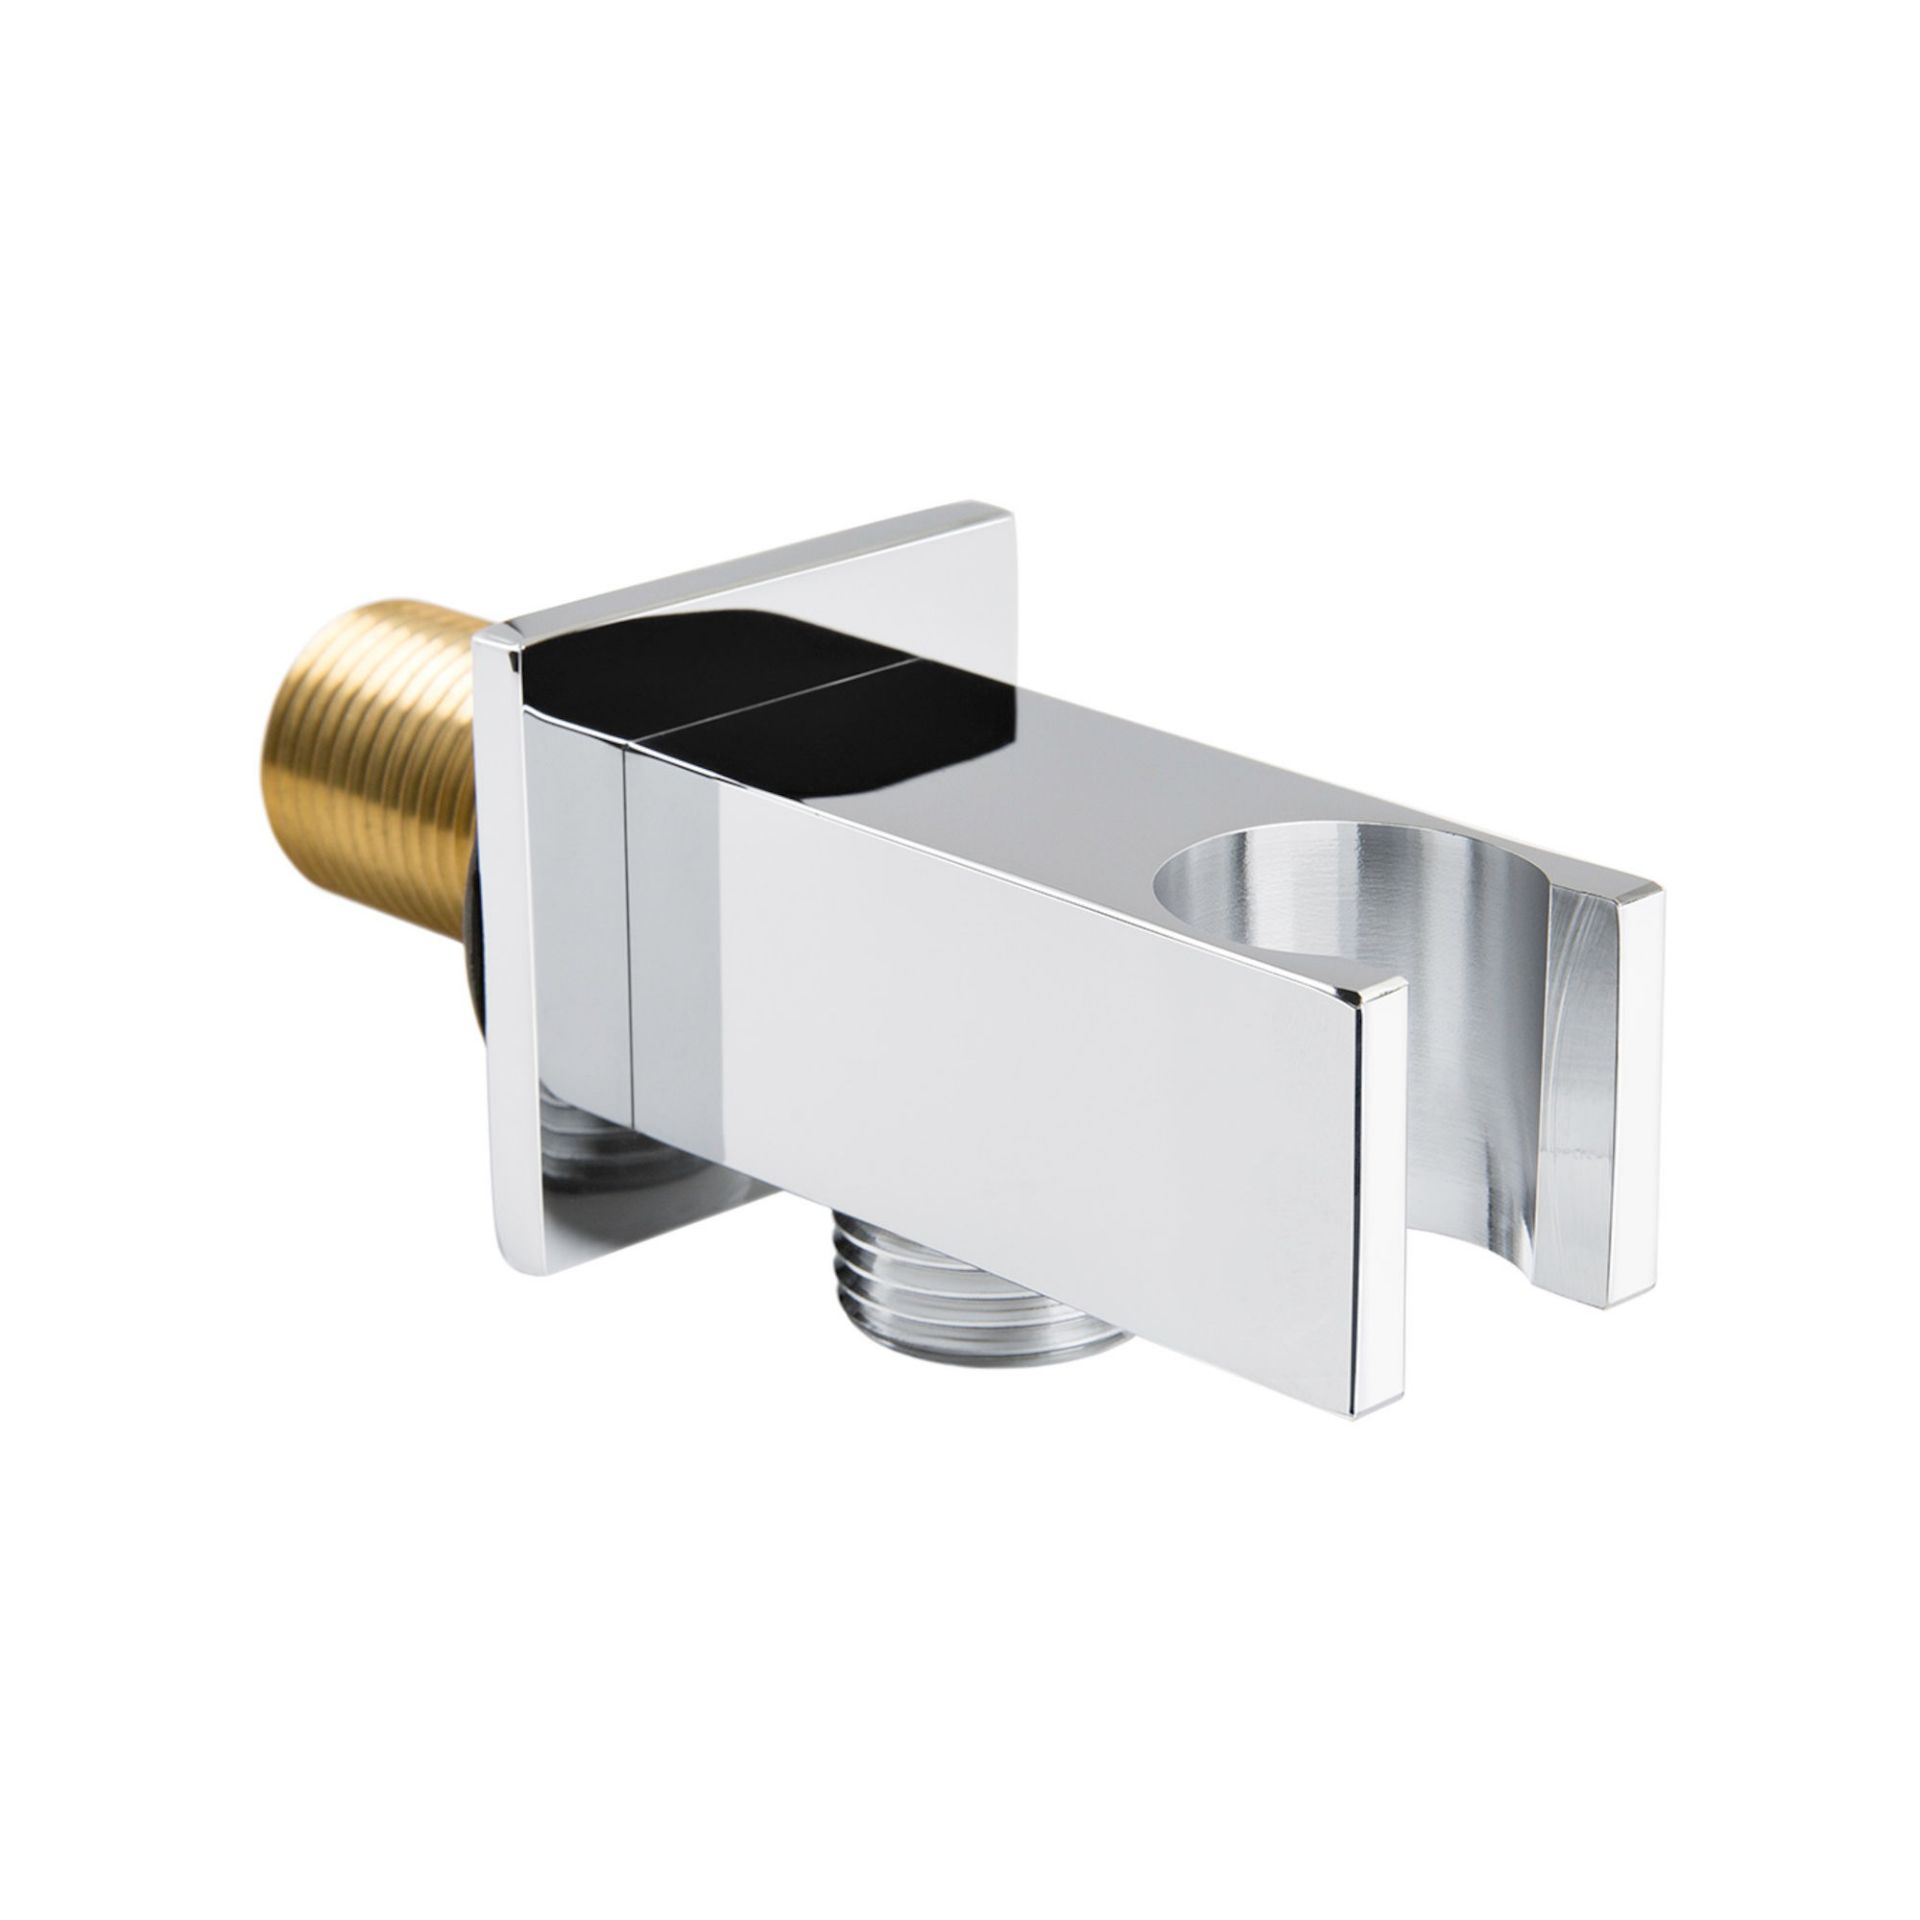 (PP1020) Brass Square Connector With Shower Handset Bracket Chrome Plated Solid Brass Standar...